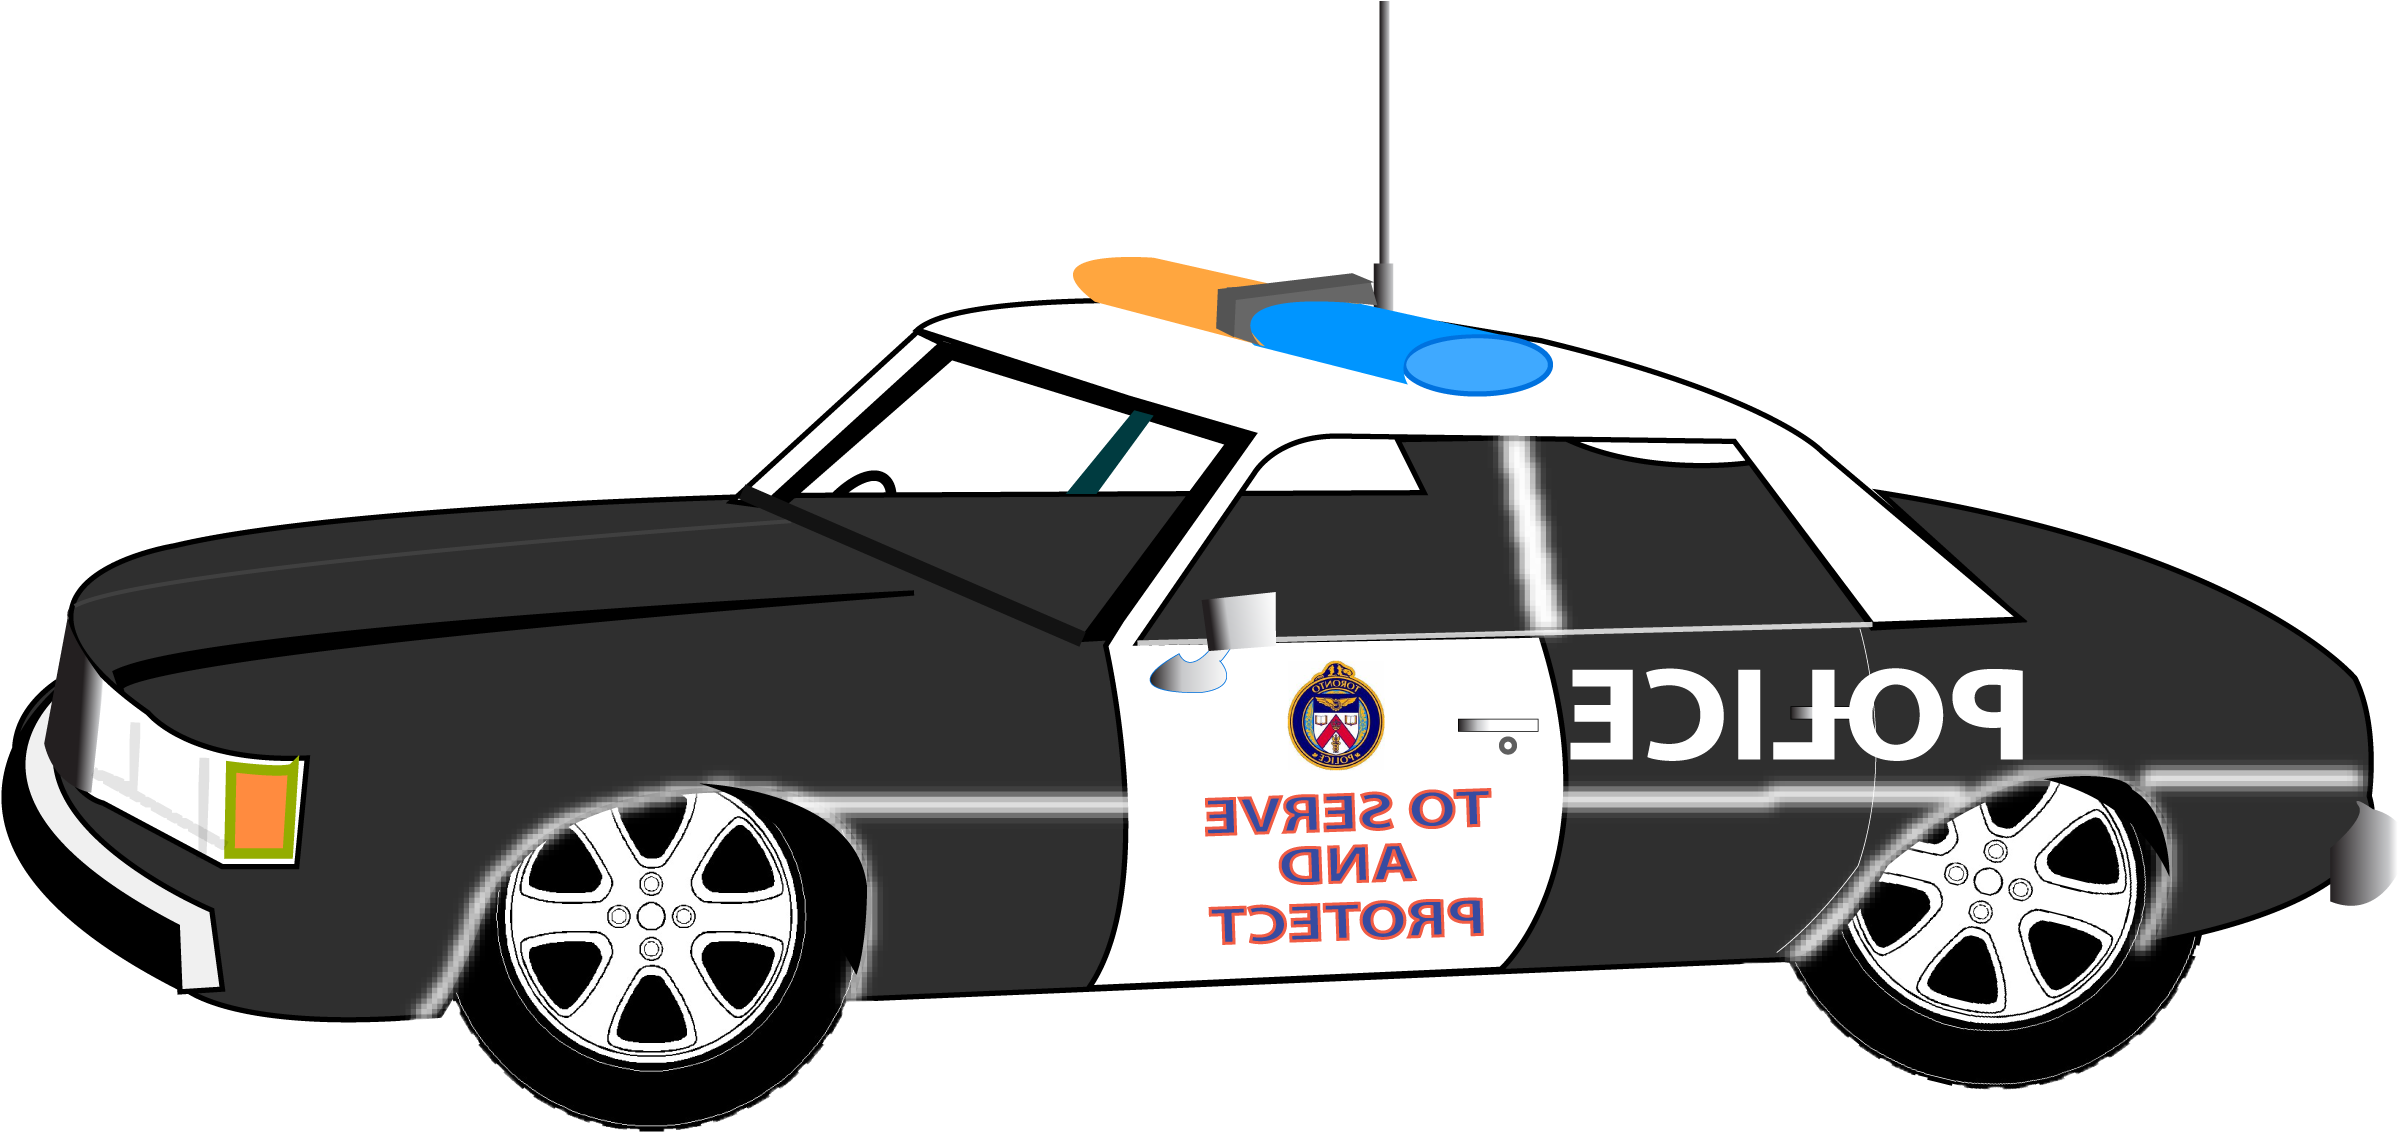 Police Car Clipart Police Car Clipart Png